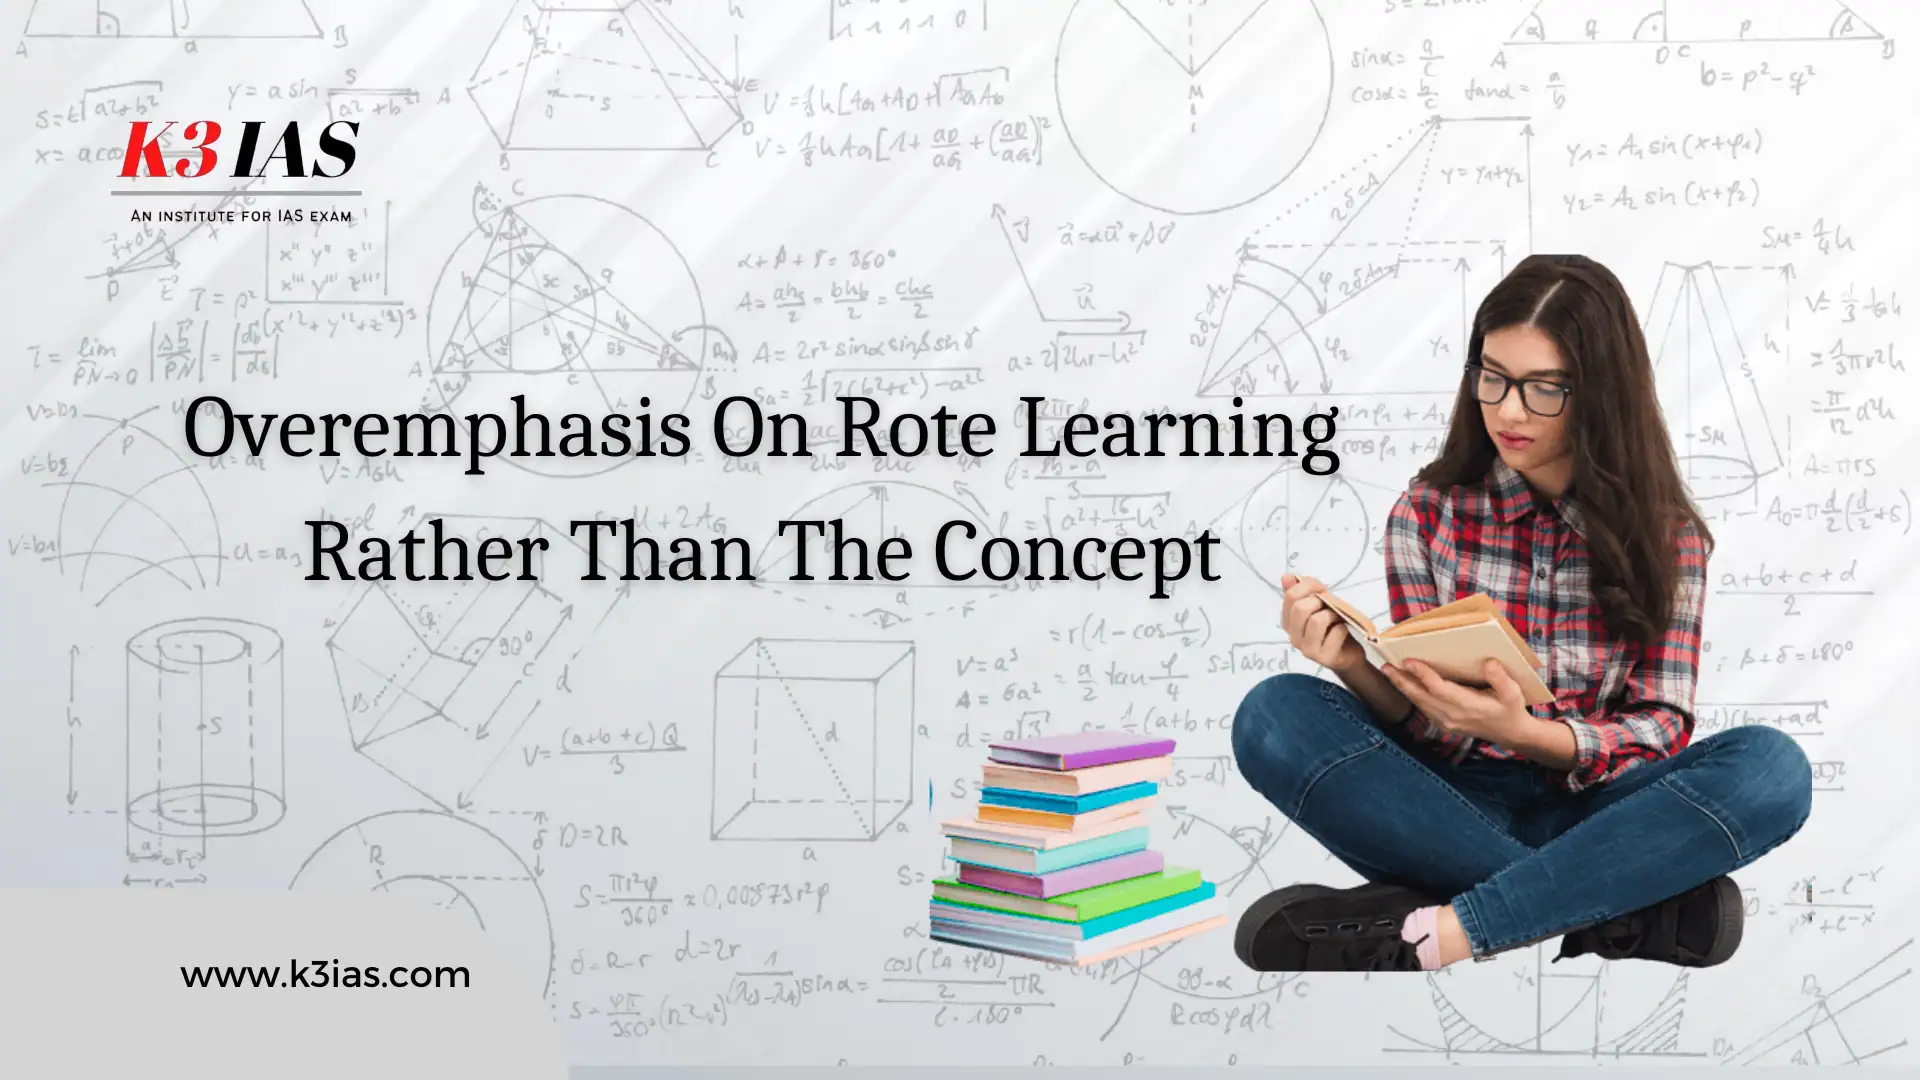 Overemphasis On Rote Learning Rather Than The Concept